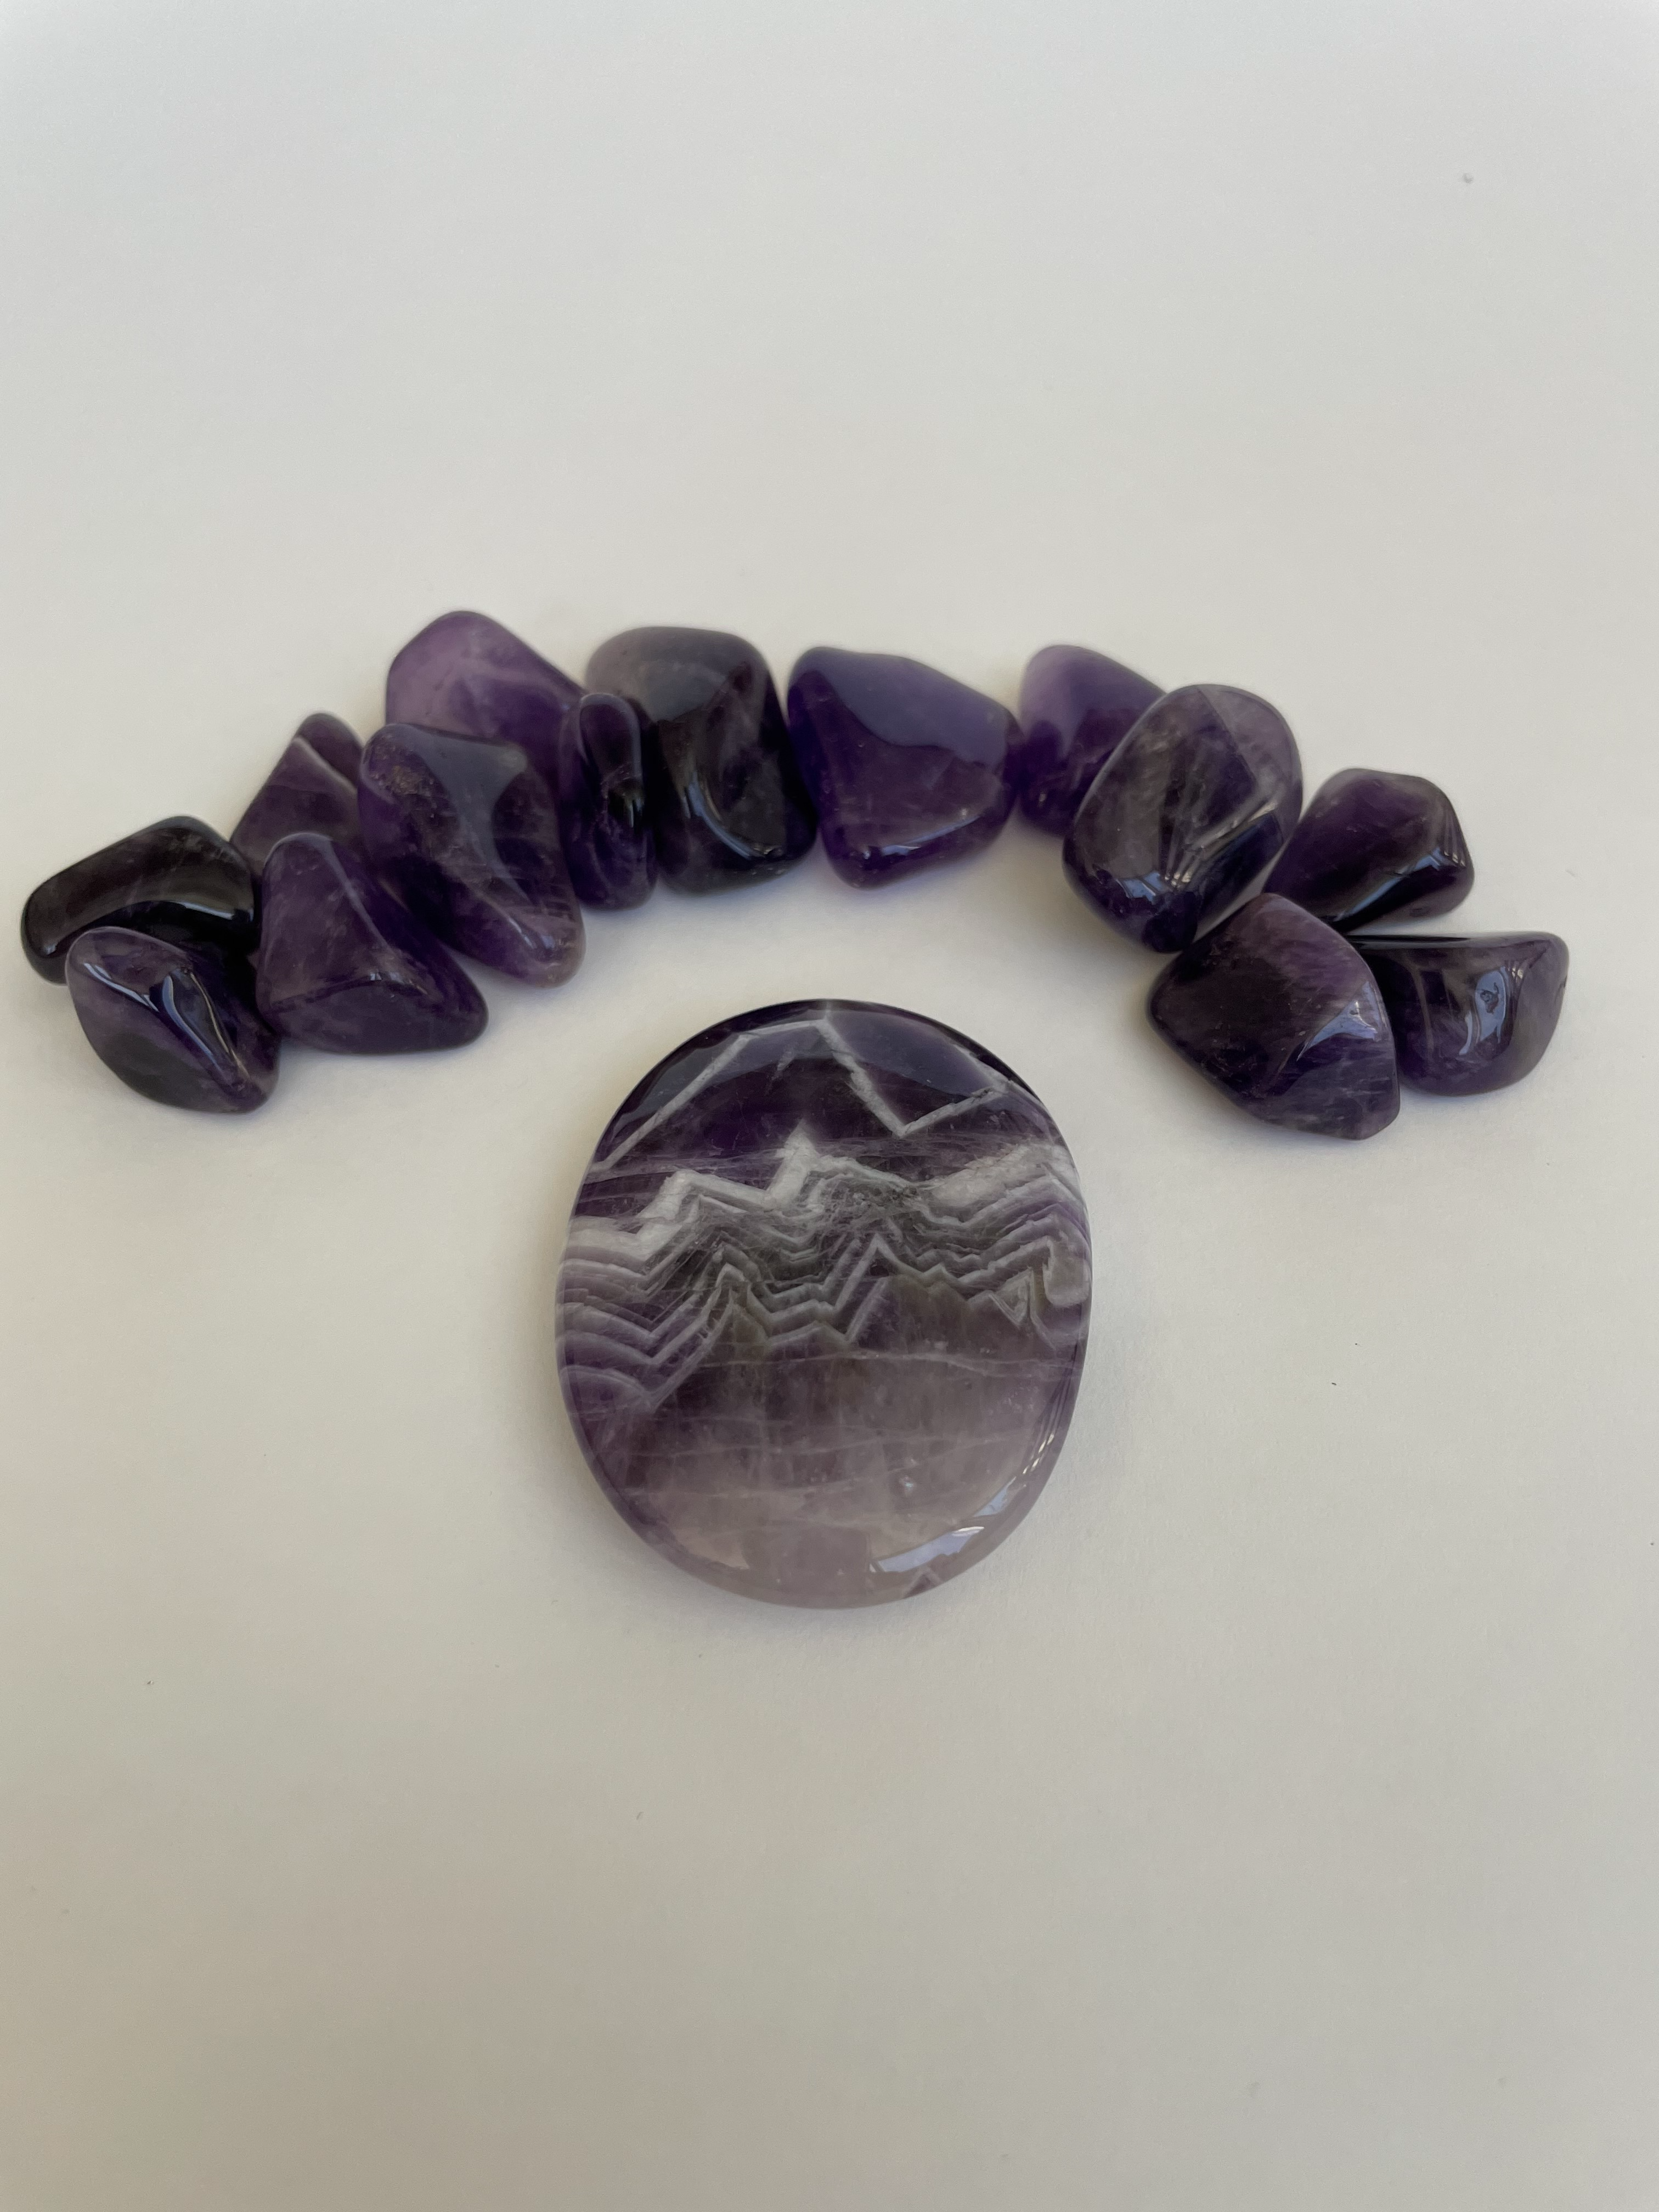 Love the banding on this palm stone.  Beautiful amethyst palm stone can be used for meditation, healing,  on your altar or as a décor item.  Amethyst, one of the most spiritual gemstones, heals, cleanses & calms, allowing you to reach meditative & higher consciousness levels more easily. It also helps to dispel negative emotional states and more. Chevron amethyst is a combination of amethyst and white quartz and when you add the quartz you get additional qualities. Approx. 2" long. Cost is $12.